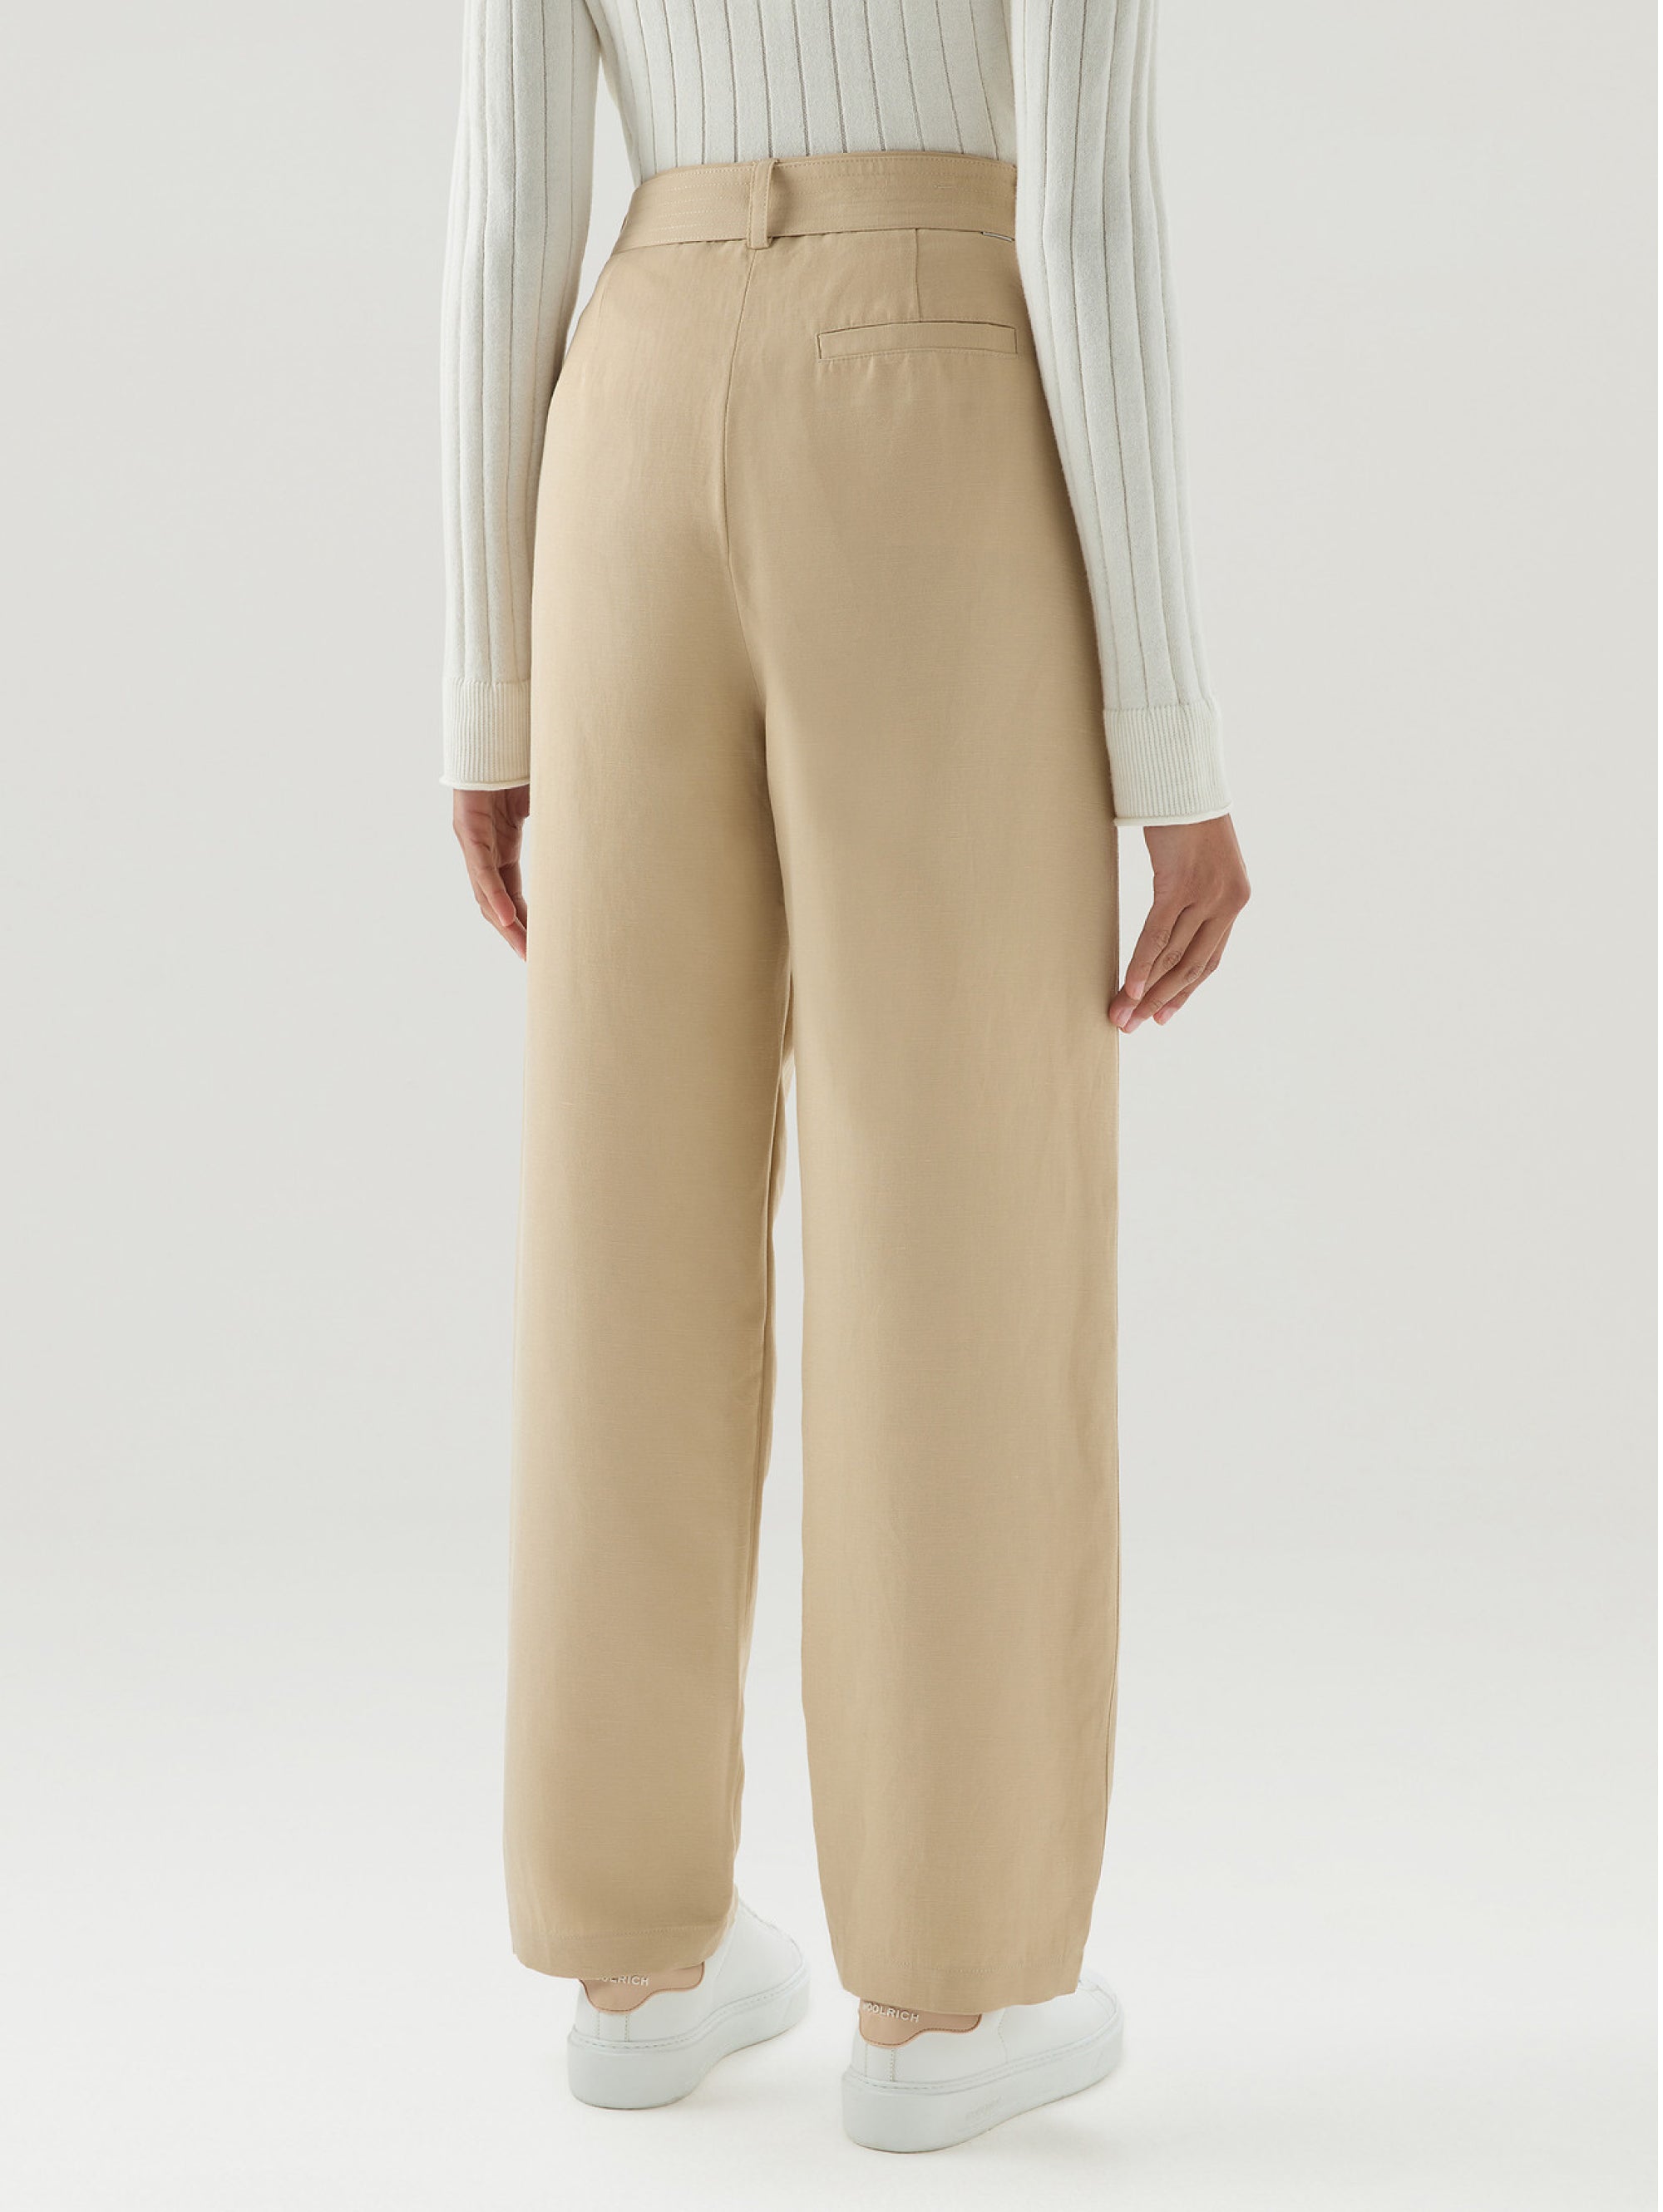 Pants with Beige Linen Belt and Pinces